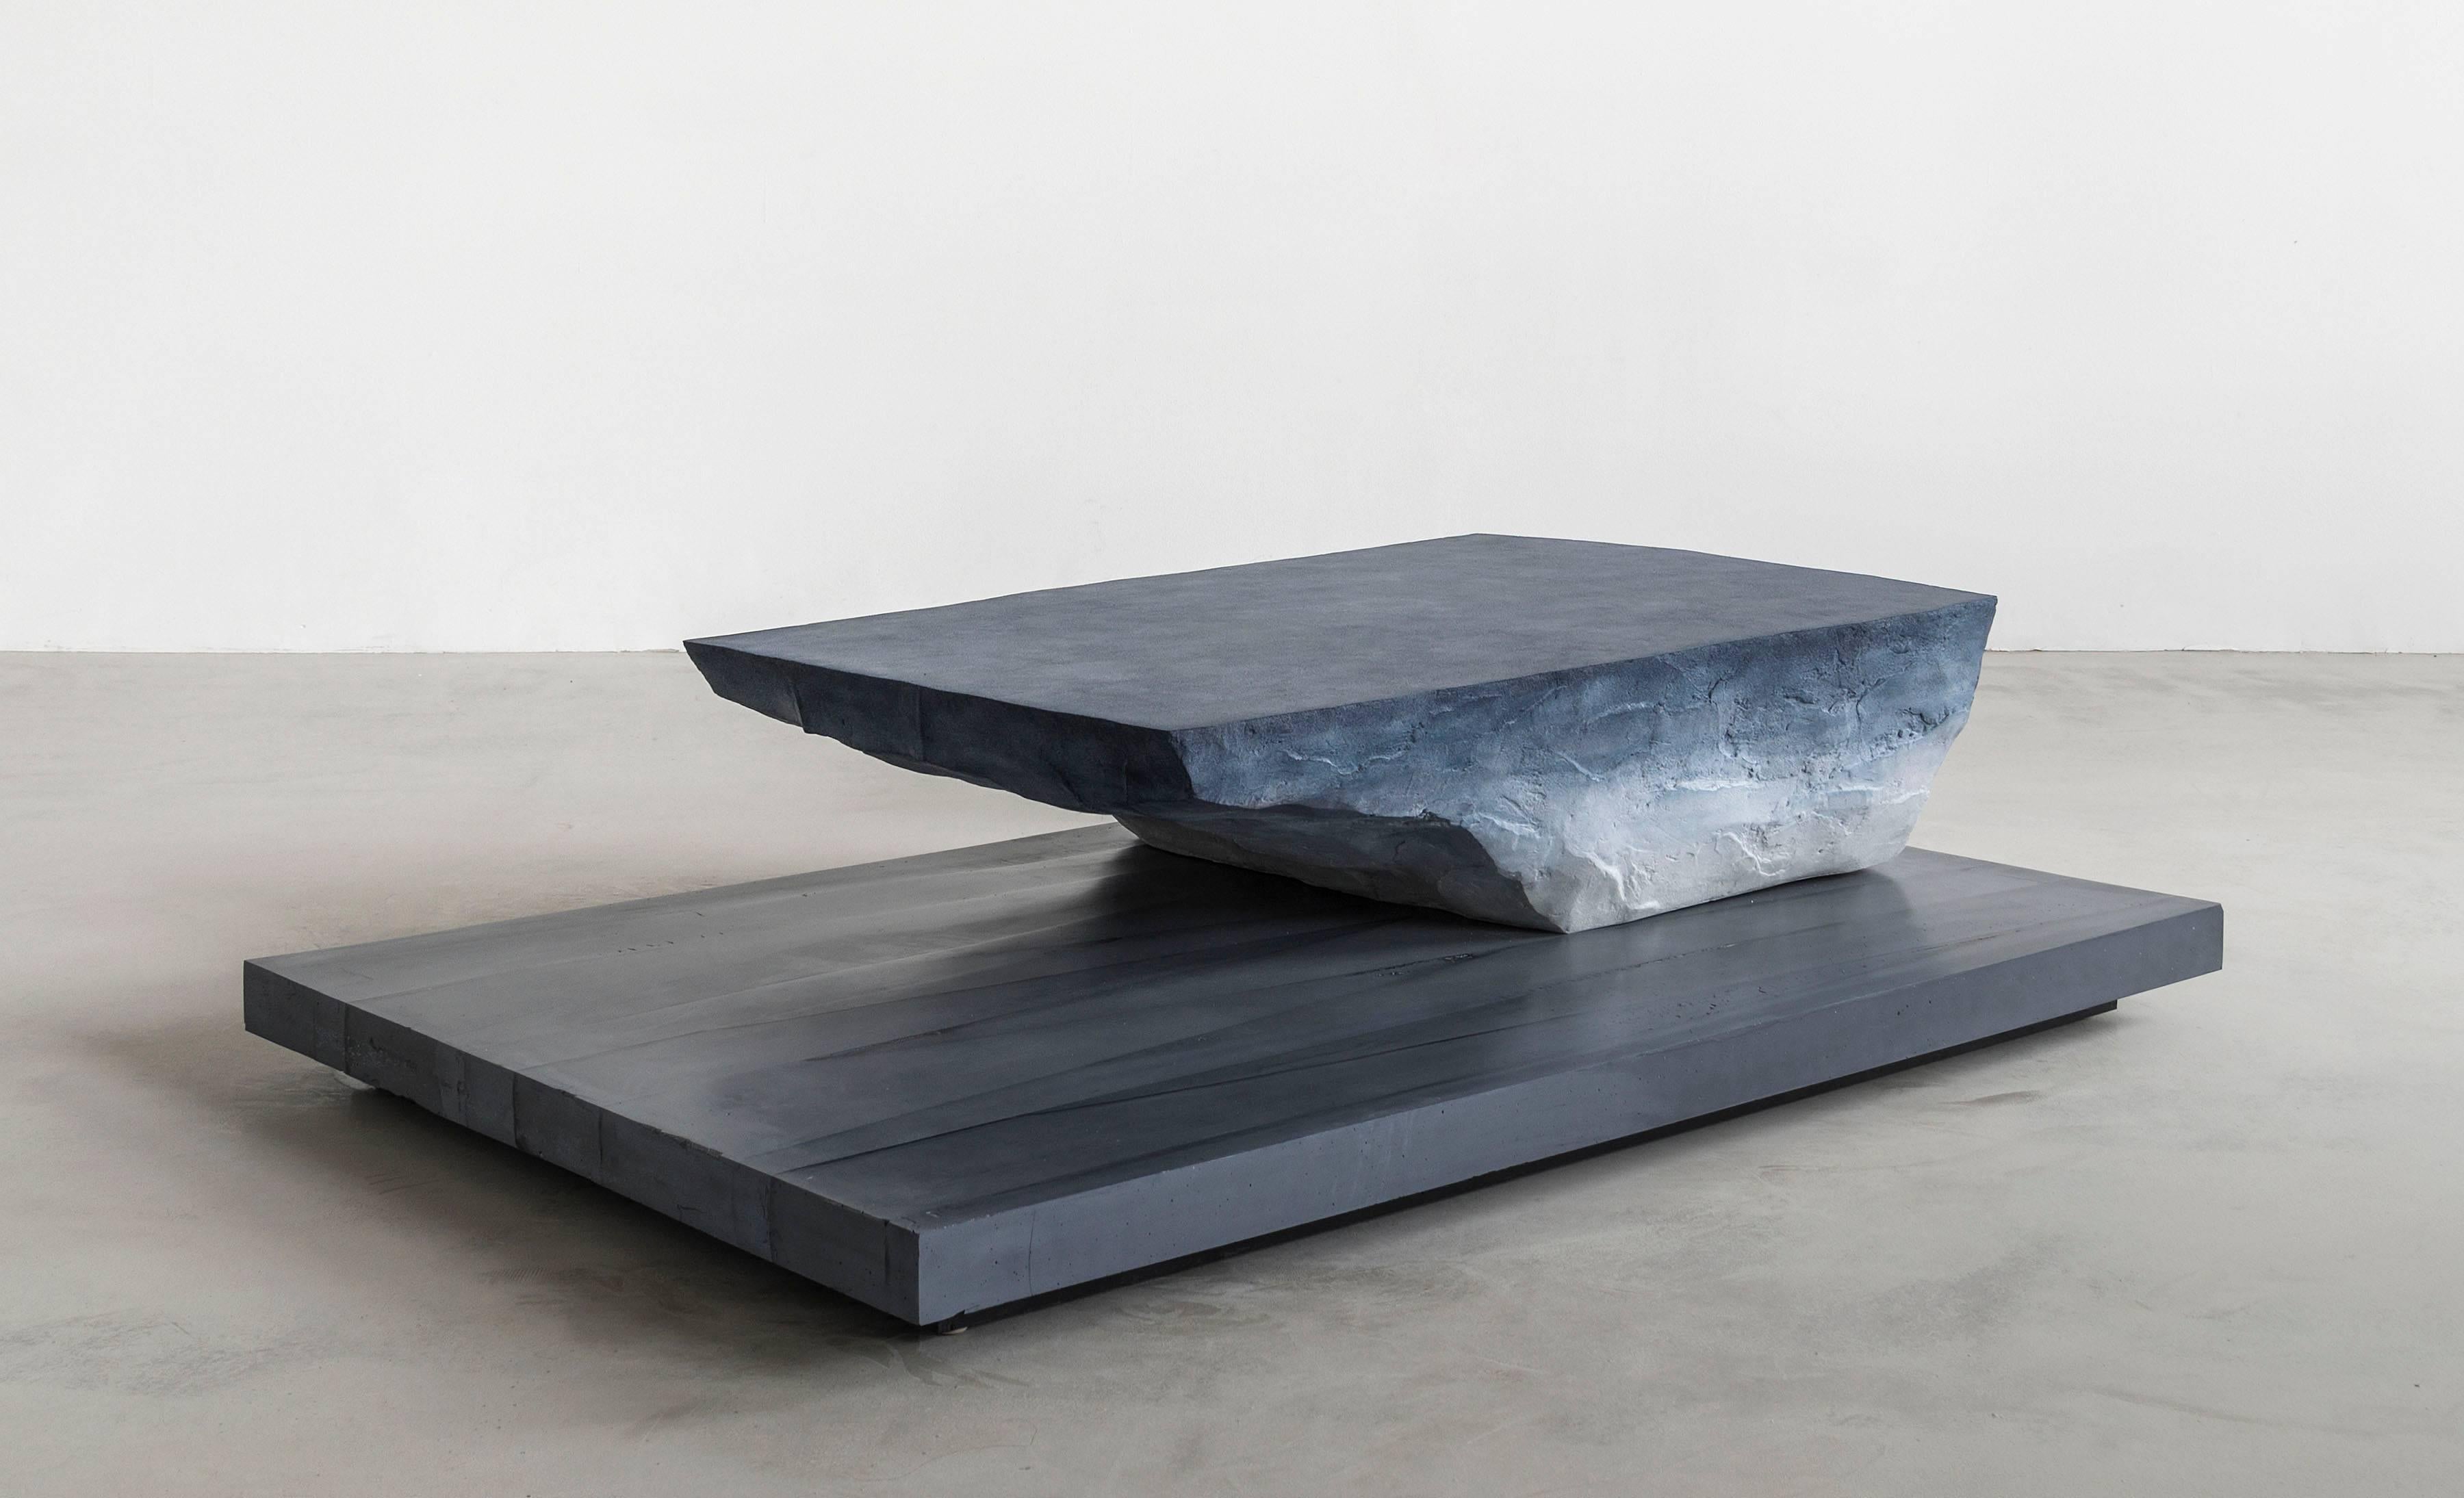 Drift (Coffee Table), 2016
Sand and cement
60” H x 40” W x 15” D
Edition of 3
From the solo exhibition at THE NEW (gallery).

About Fernando Mastrangelo (designer):
Founder of FM/s, artist and designer Fernando Mastrangelo highlights contradicting